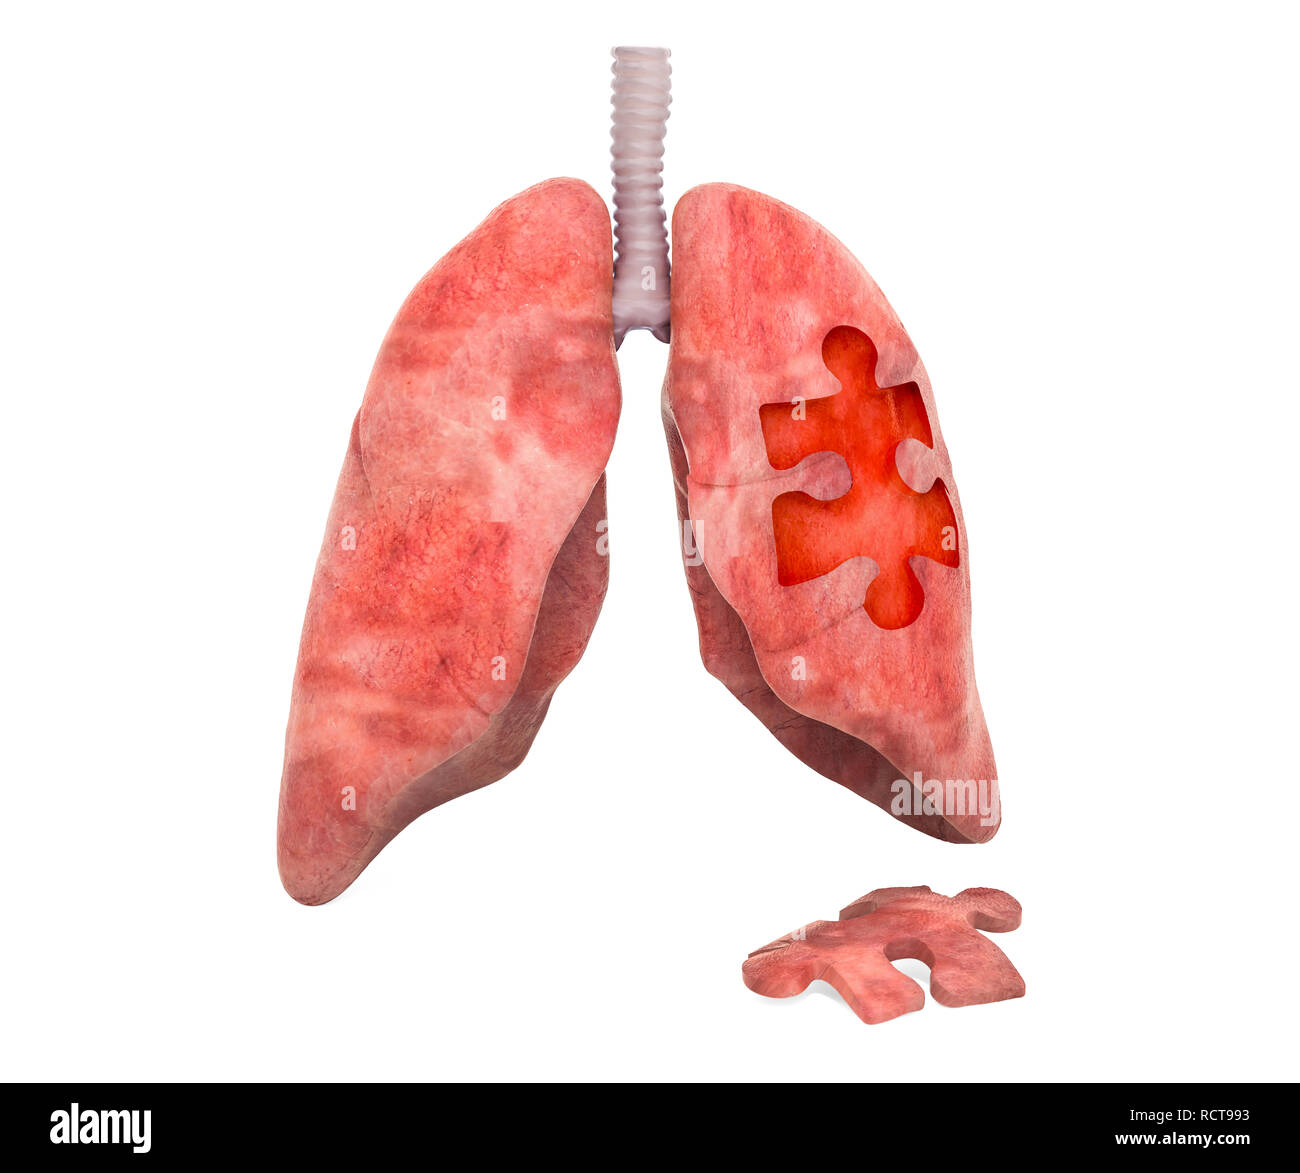 Lungs disease or infection concept, 3D rendering isolated on white background Stock Photo